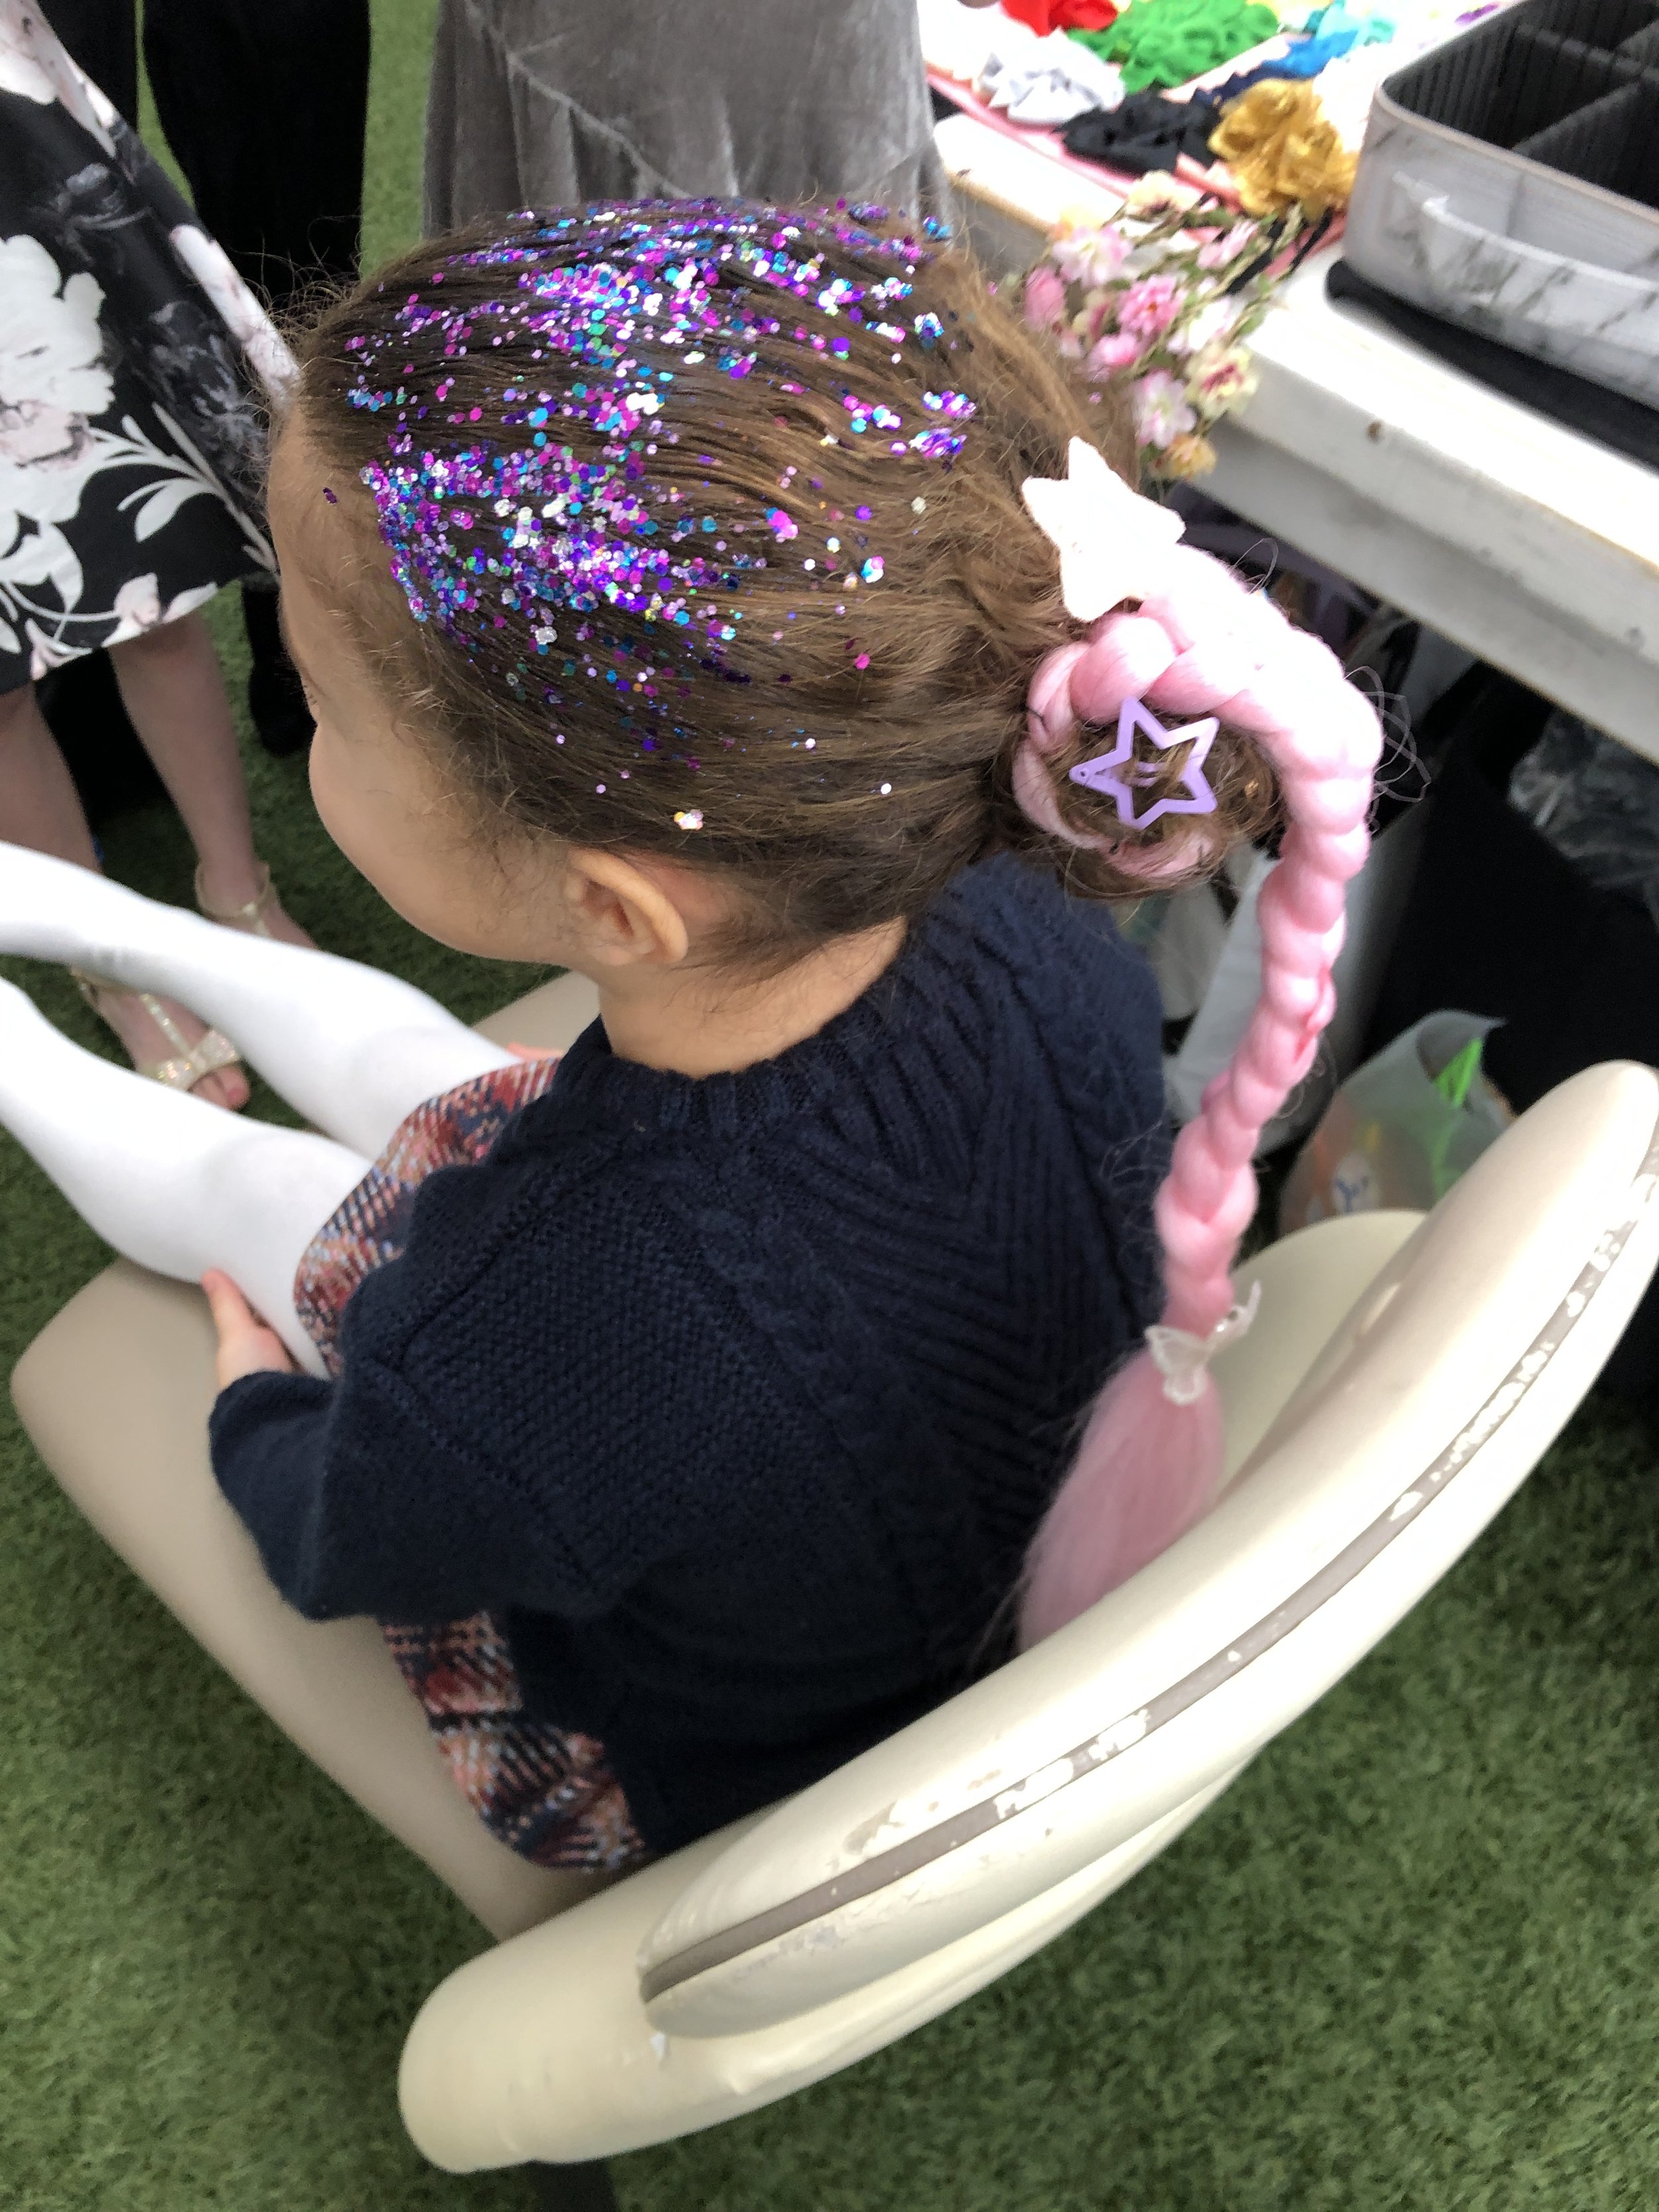 Rainbow Hair Braiding for Kids Birthday Party Scarsdale and Rye.JPG